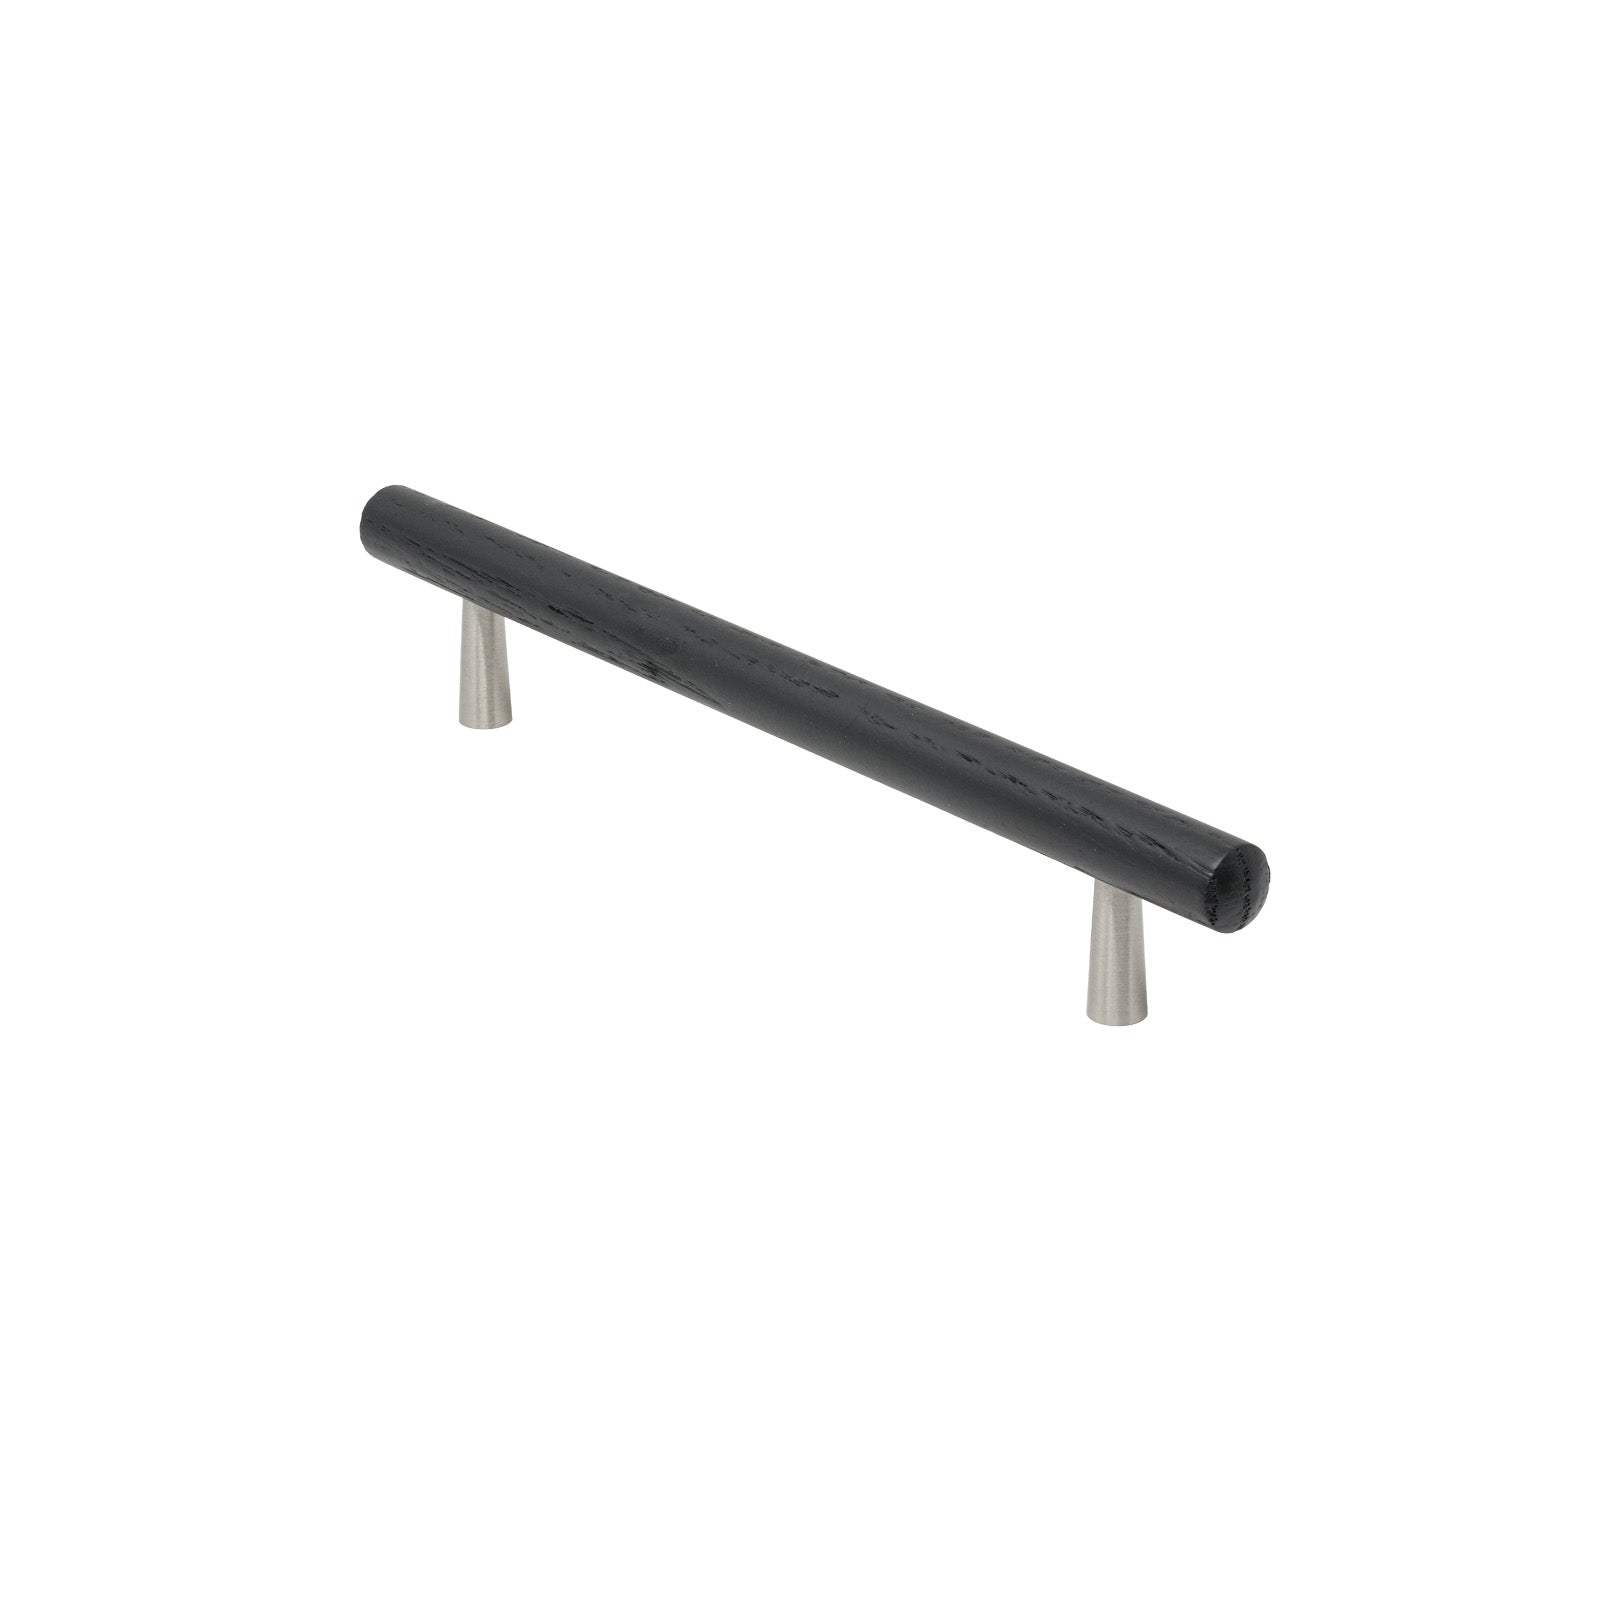 SHOW 160mm T-Bar Tilaa Cabinet Pull Handle In Ash Finish